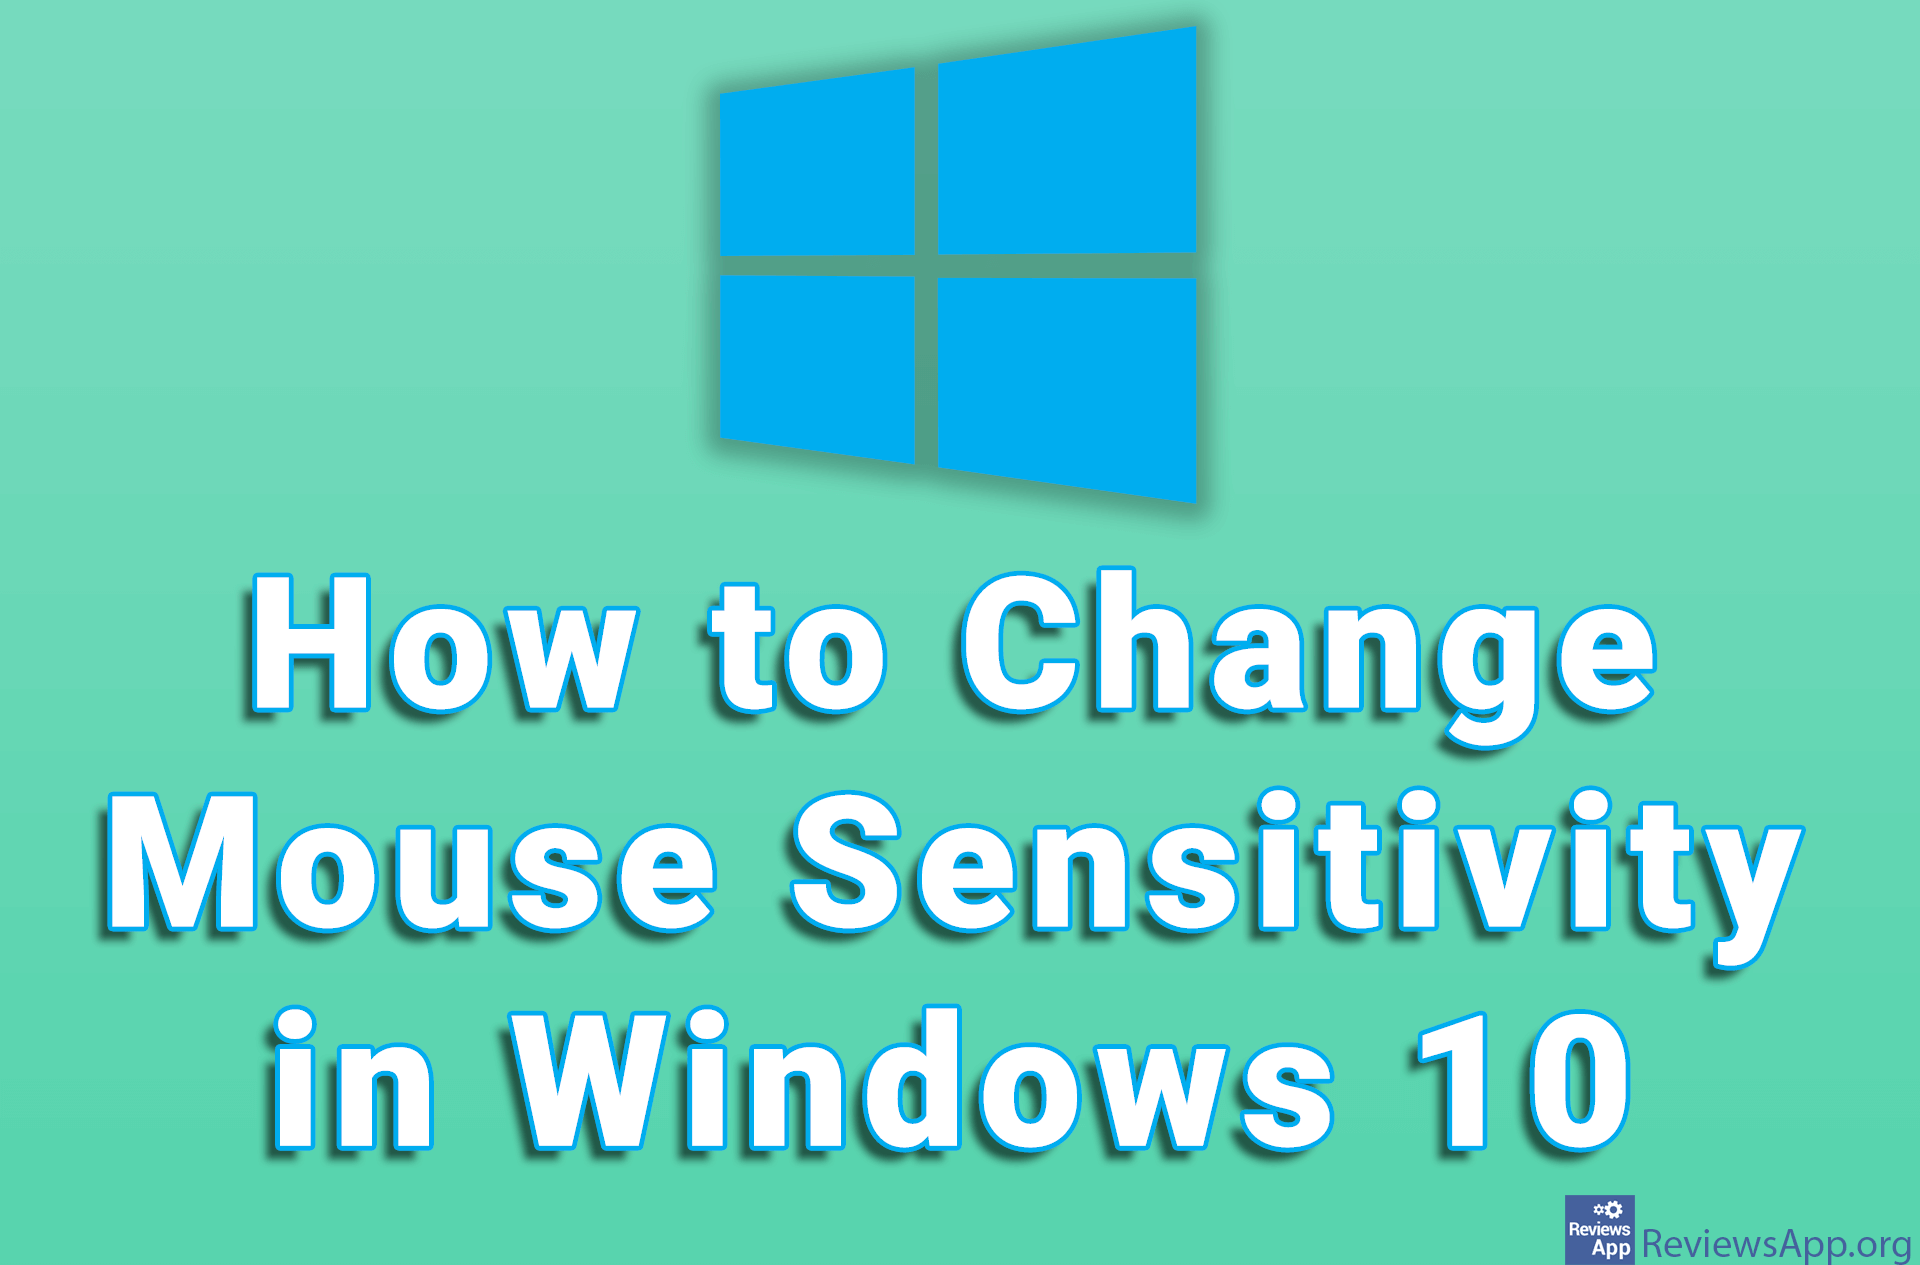 How to Change Mouse Sensitivity in Windows 10